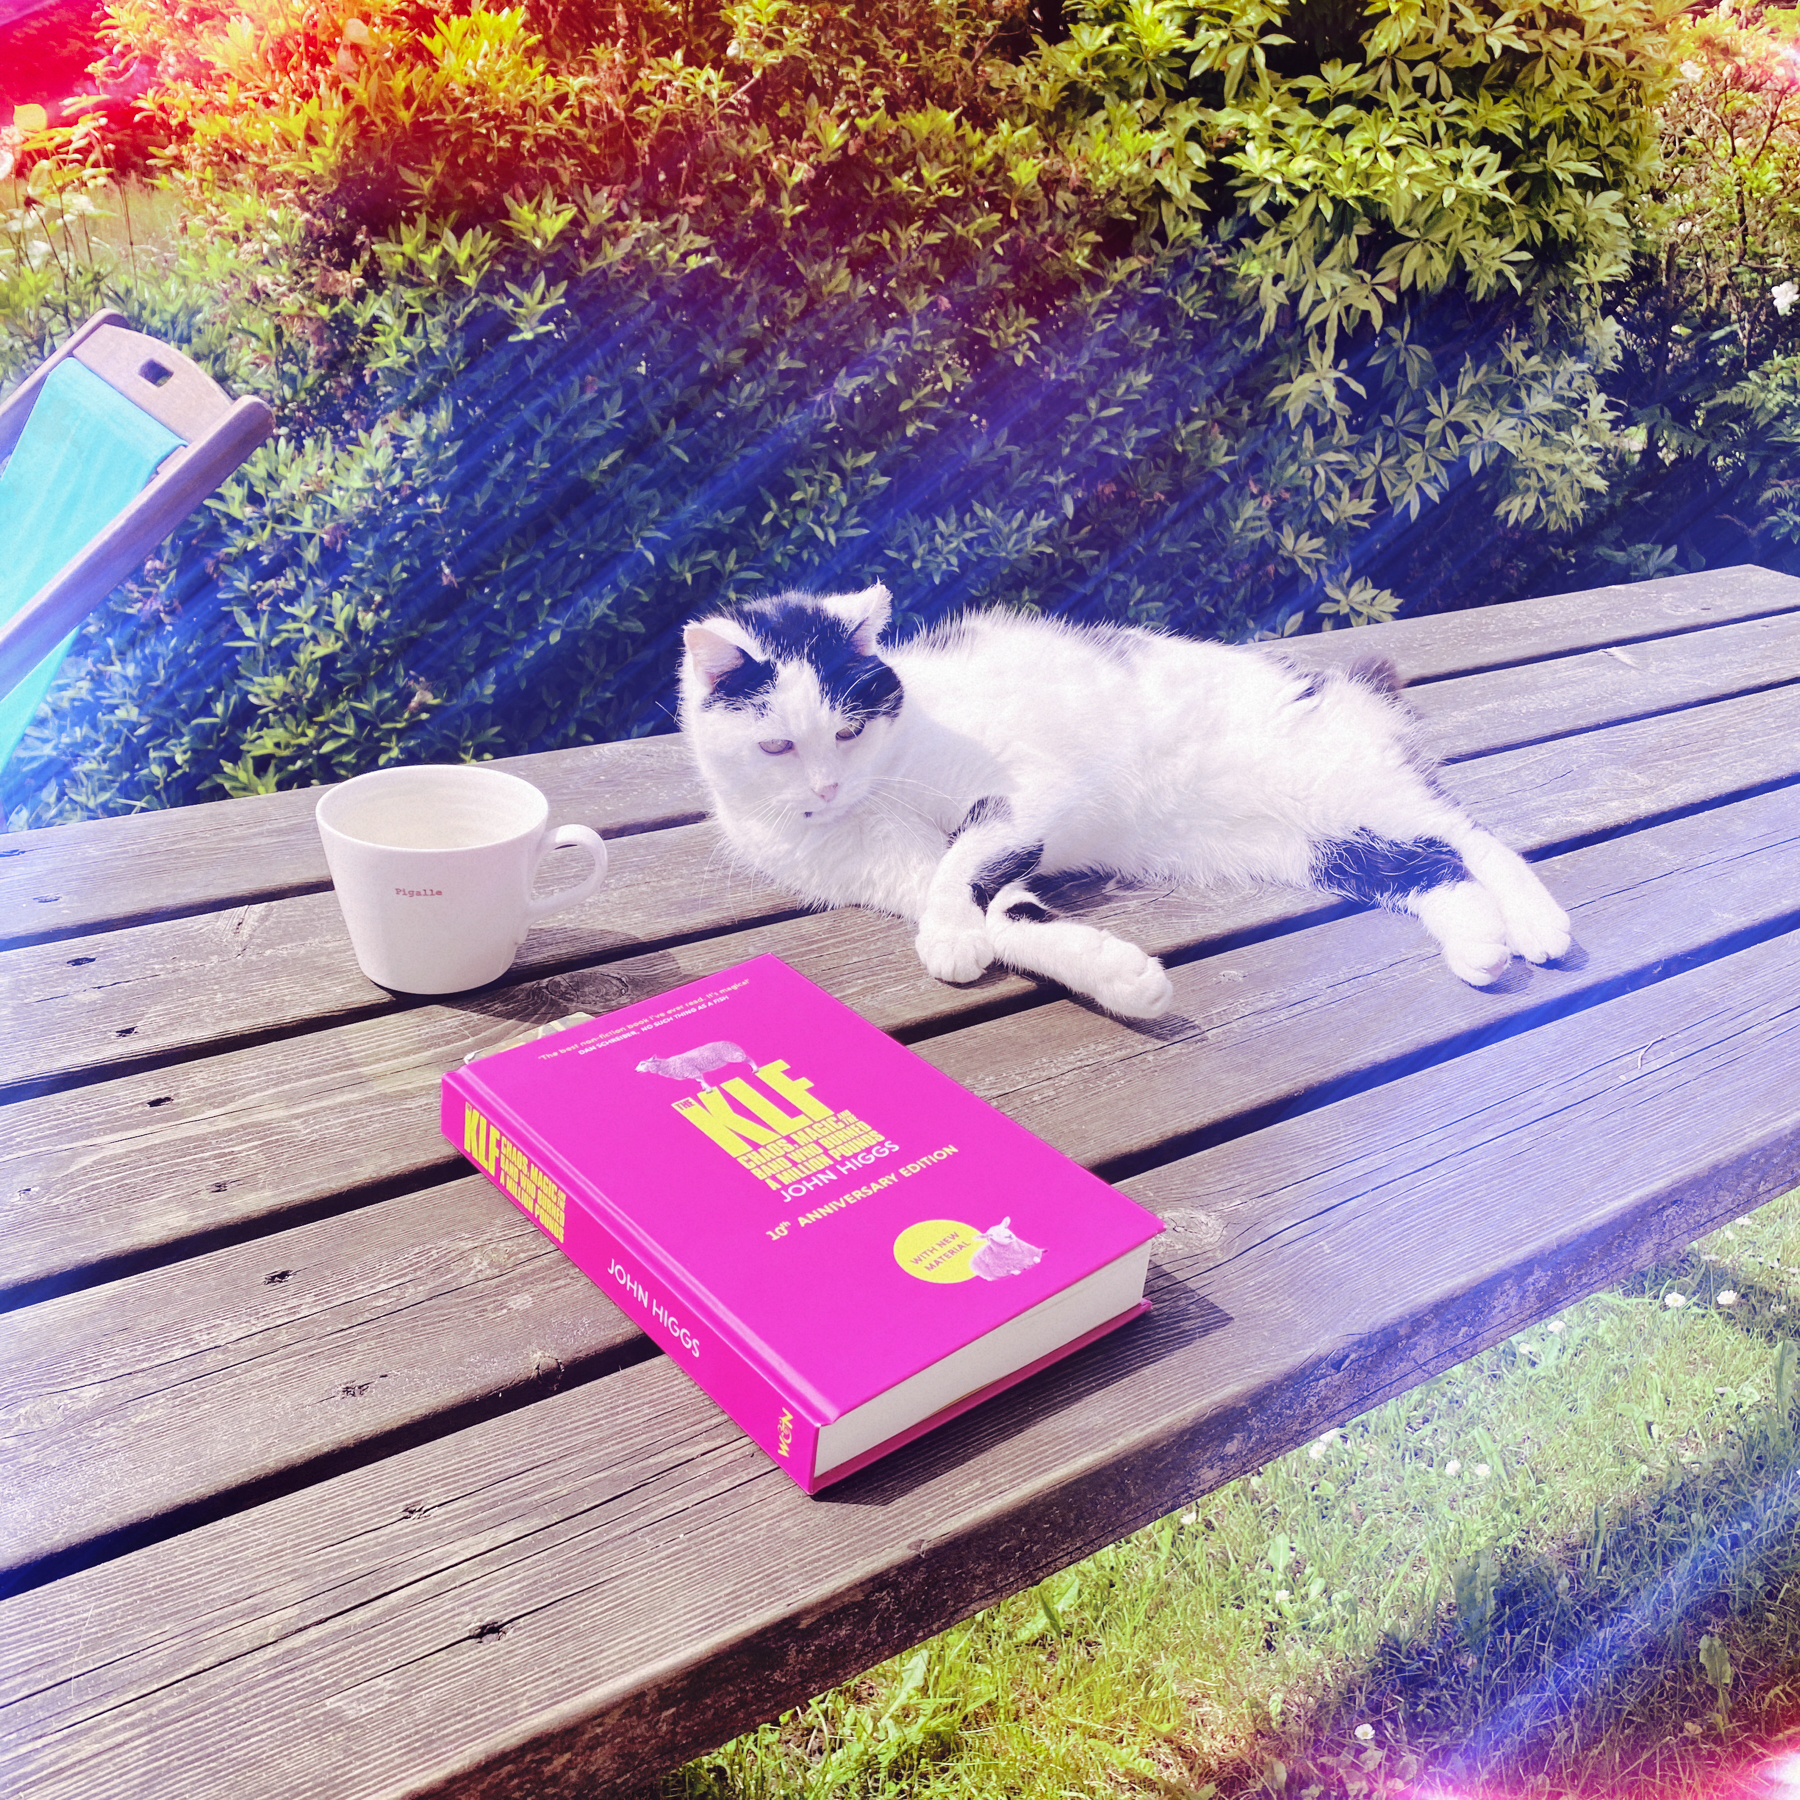 A black-and-white cat is lounging on a wooden picnic table in a garden. Next to the cat is a white mug and a pink book titled The KLF by John Higgs. The surroundings include lush, green bushes.